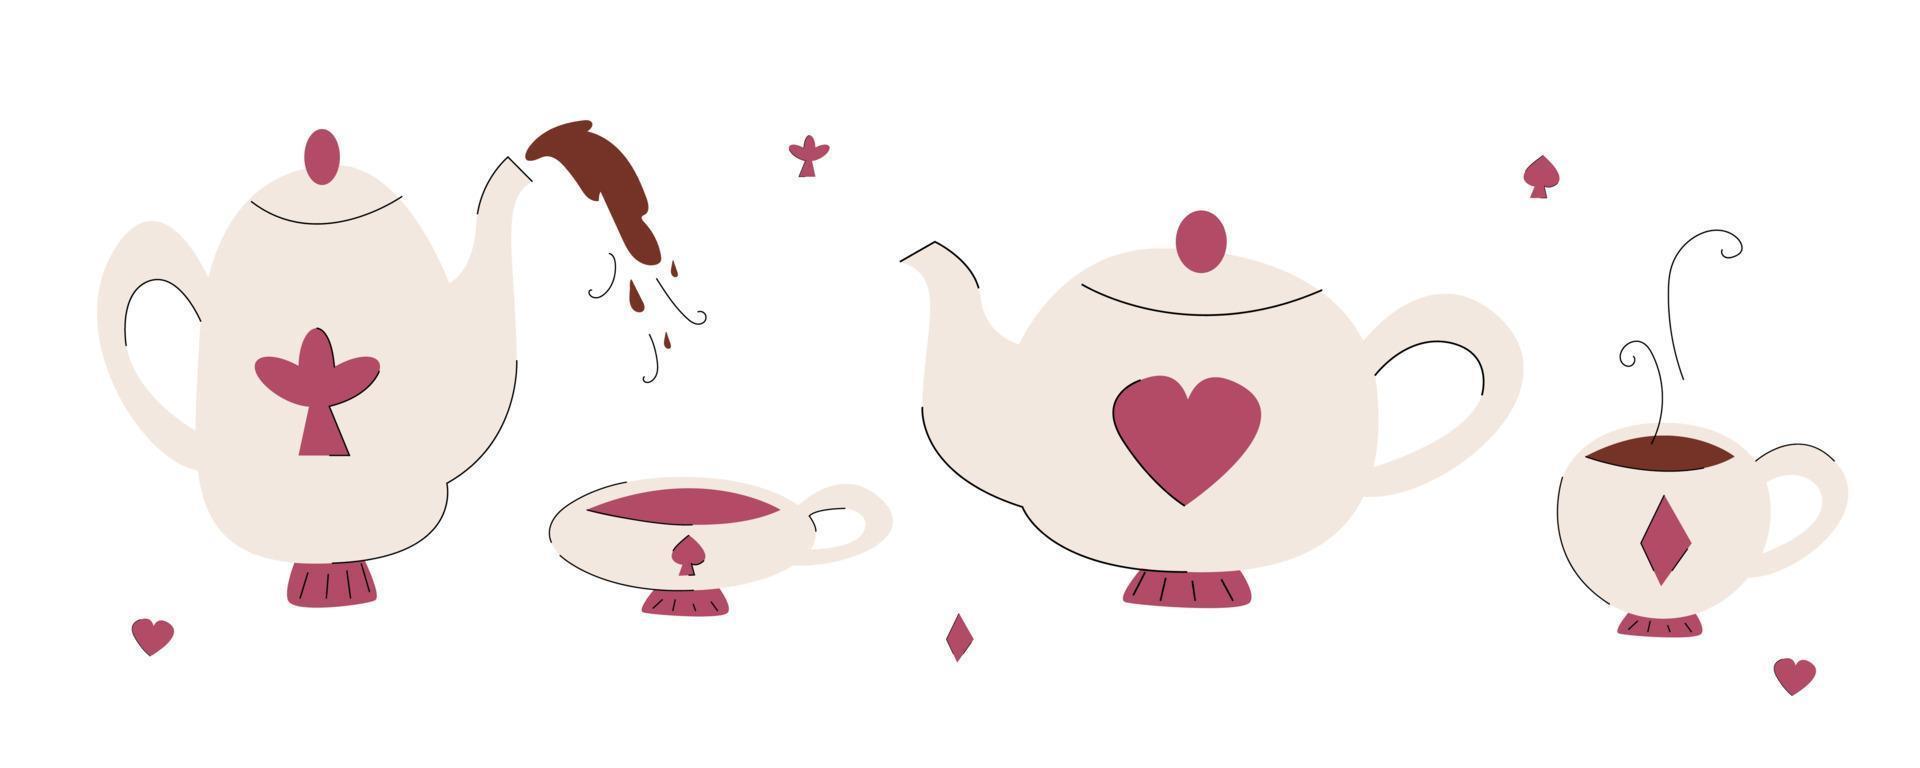 Set of cups and teapots from Alice in Wonderland in a hand drawn style vector